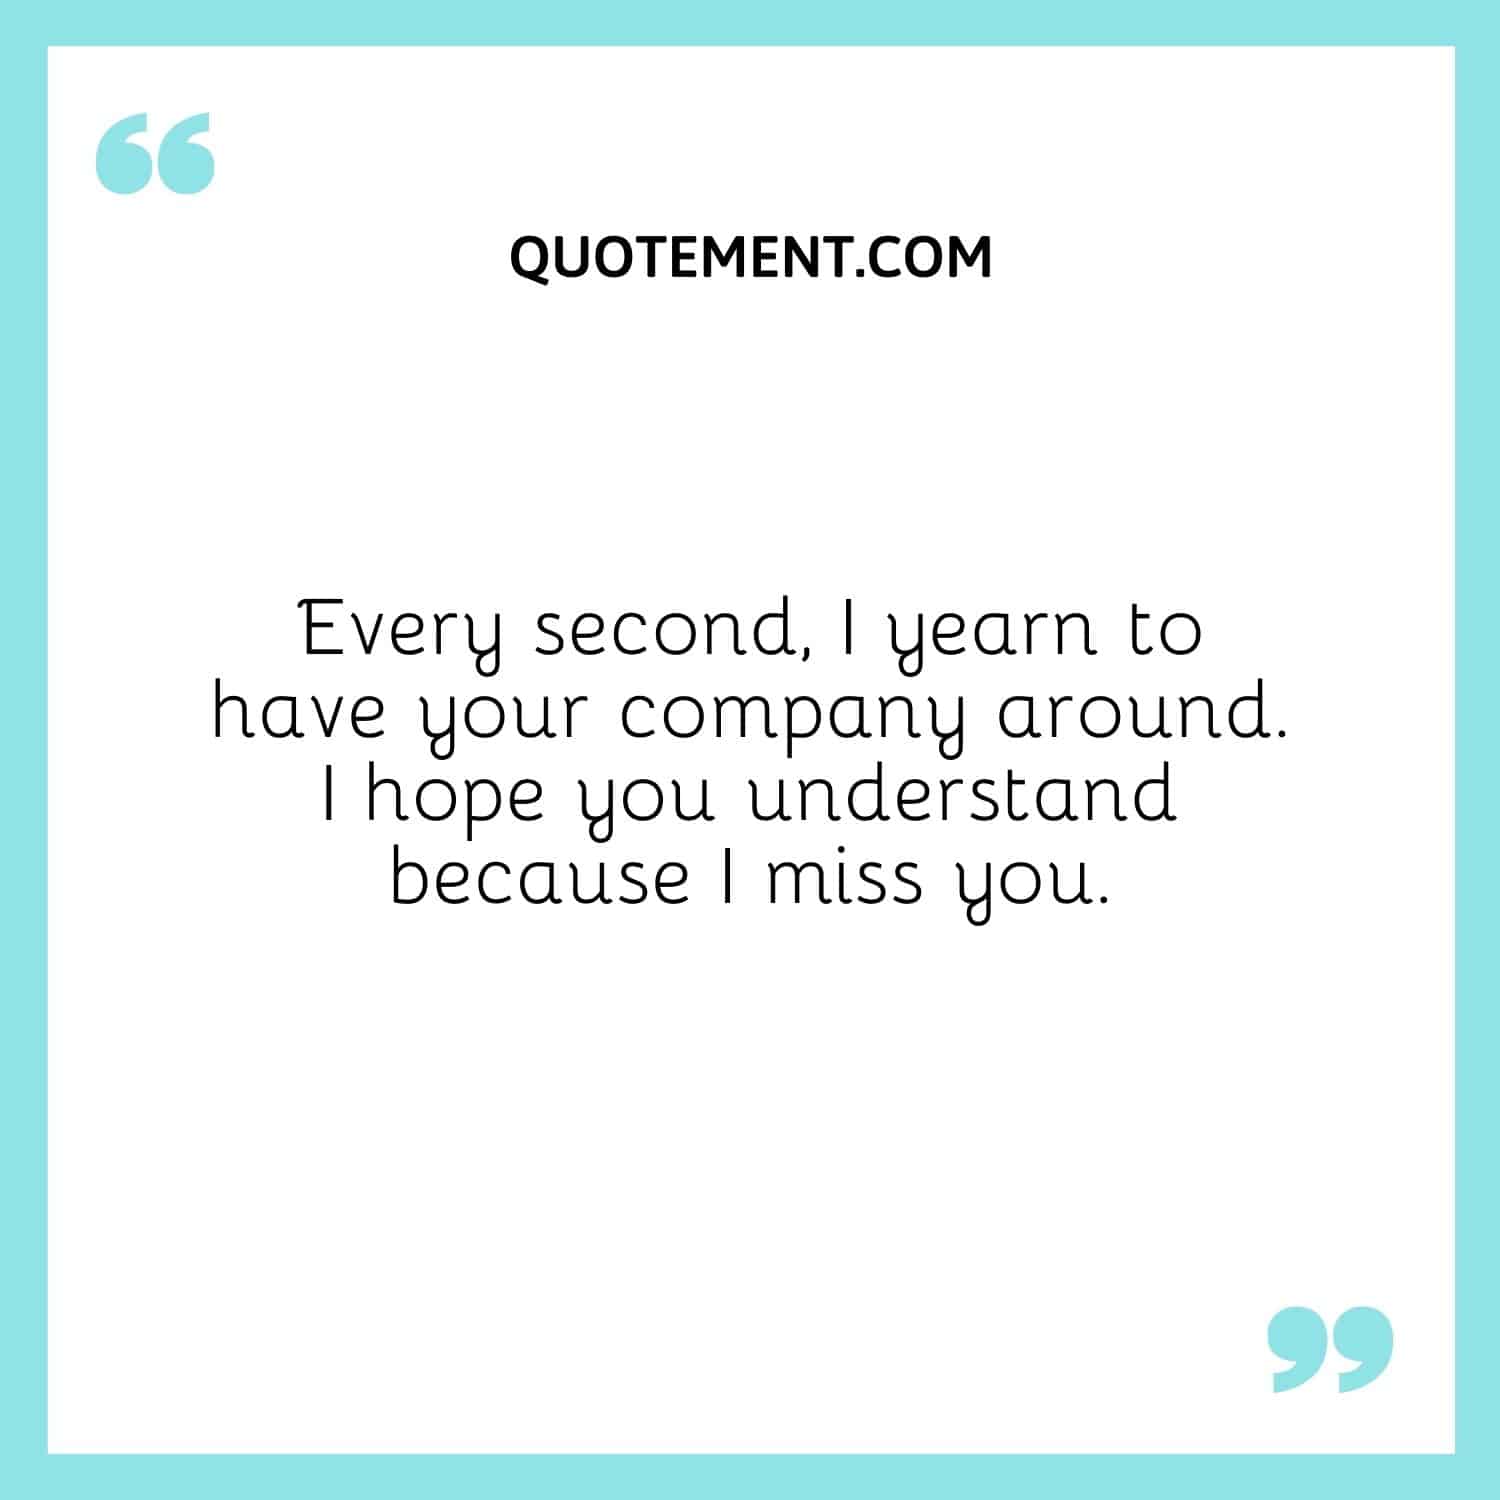 Every second, I yearn to have your company around. I hope you understand because I miss you.